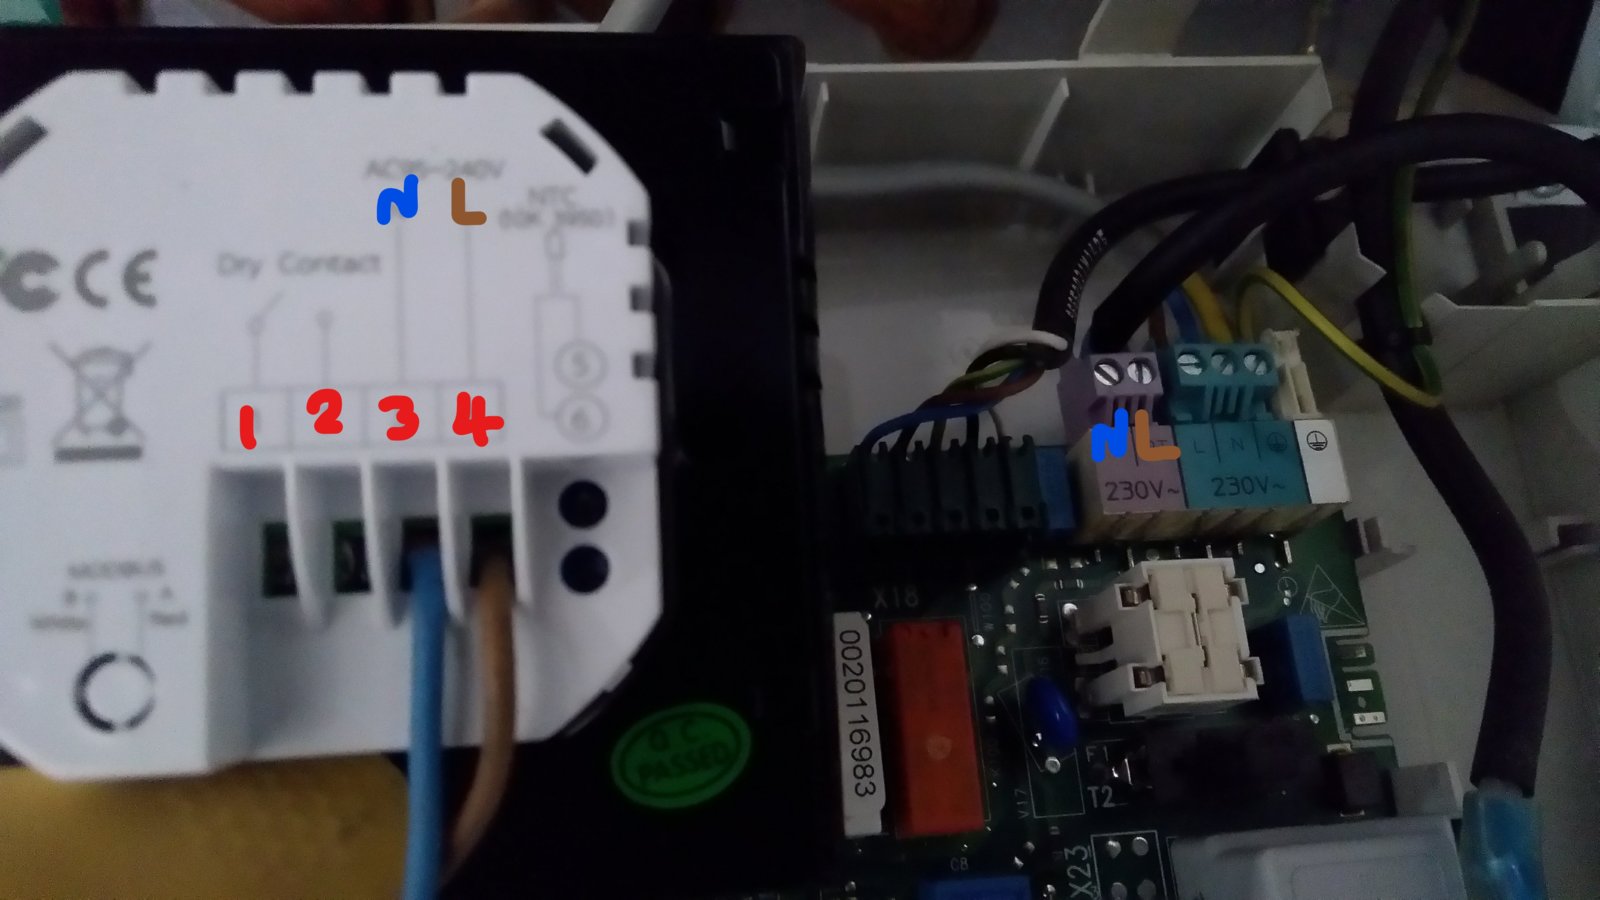 thermostat wiring bh 3000 to 831 vaillant (threads merged) | DIYnot Forums